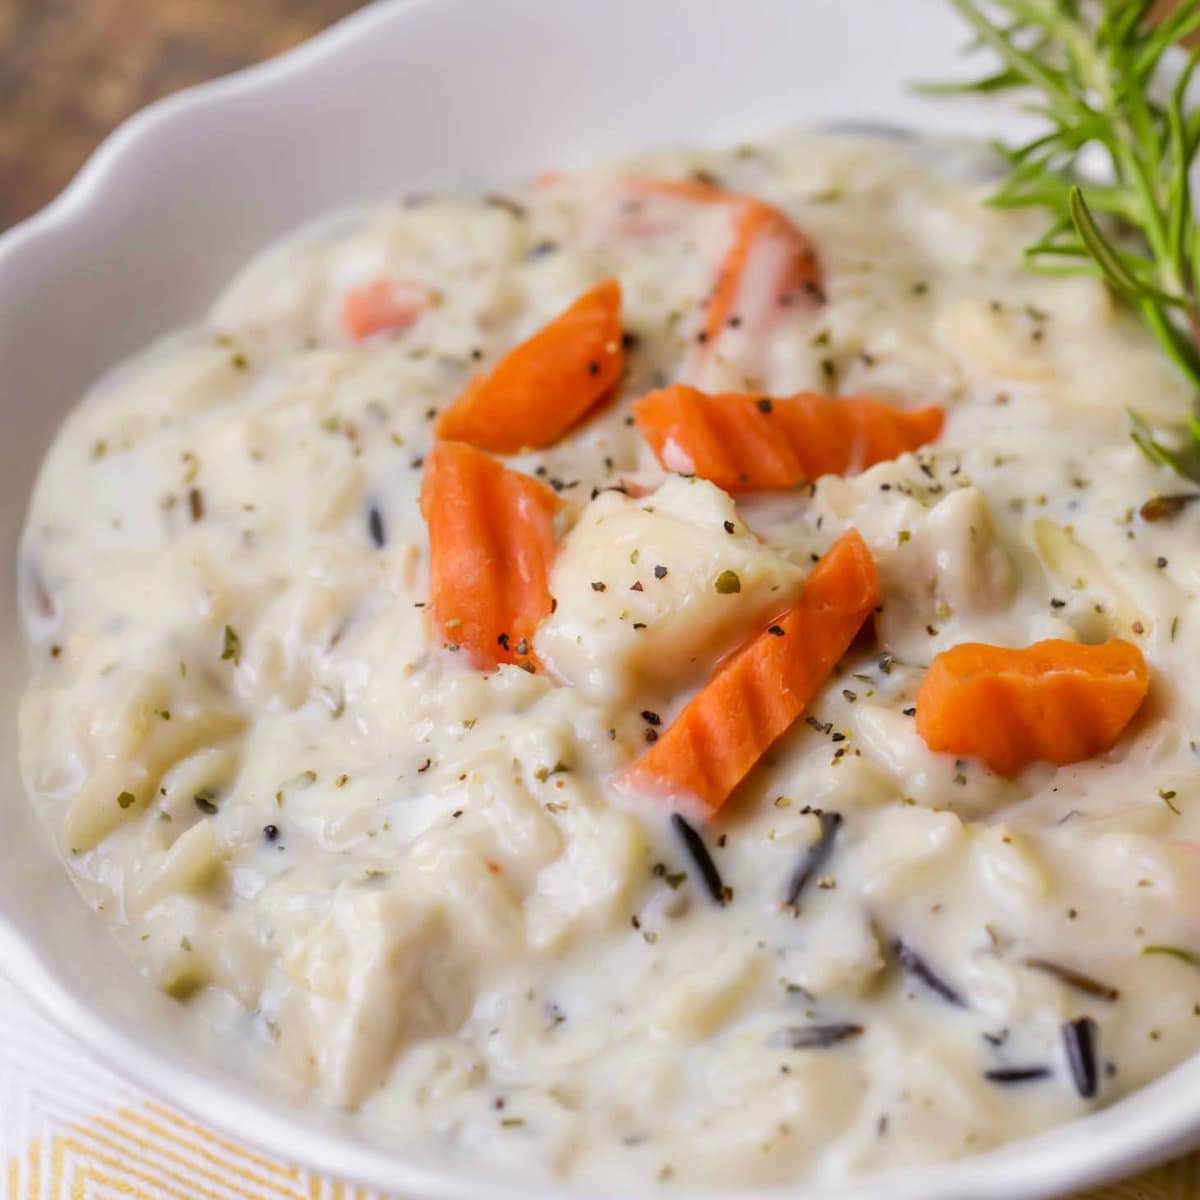 Easy soup recipes - Chicken wild rice soup with fresh rosemary on the side.